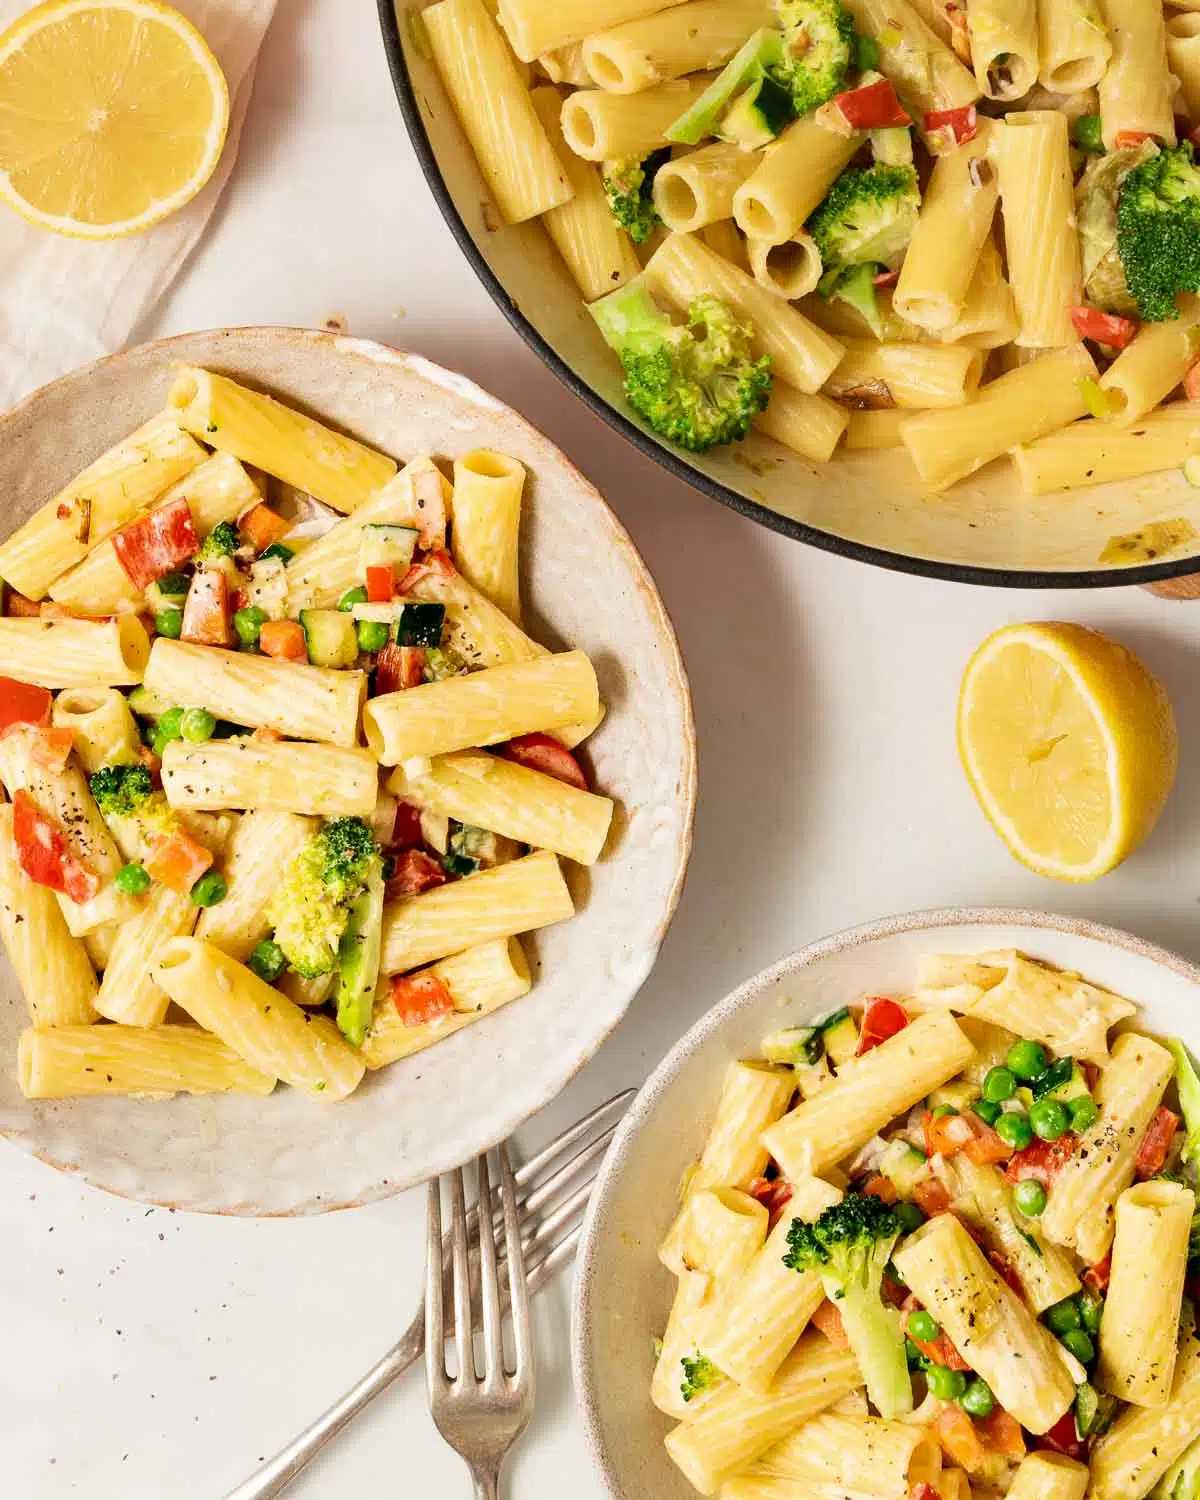 Bowls of creamy vegetable pasta.